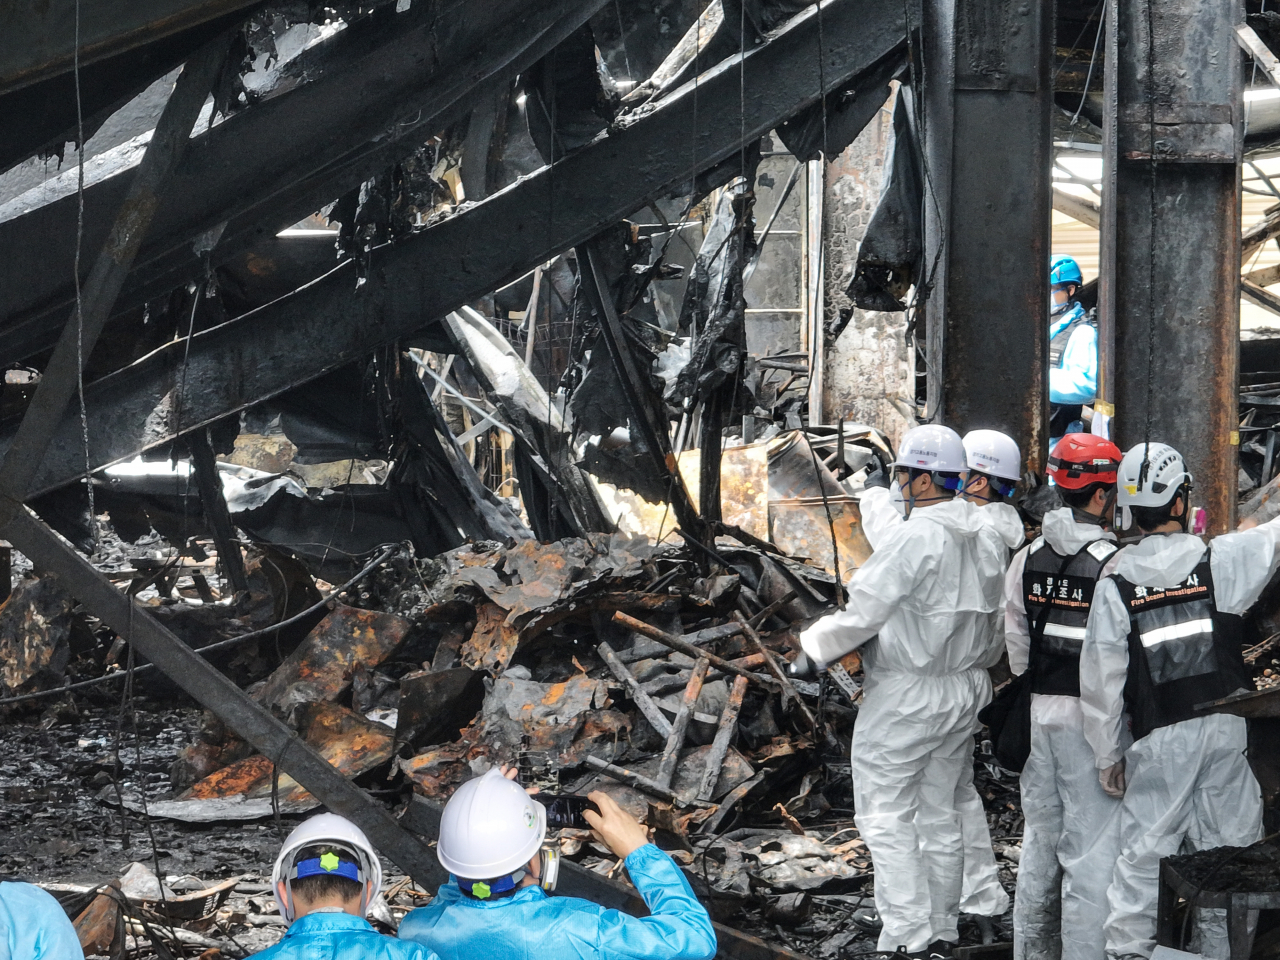 Inspection of the cause of the fire is underway on June 25 in a battery plant in Hwaseong, Gyeonggi Province. (Yonhap)